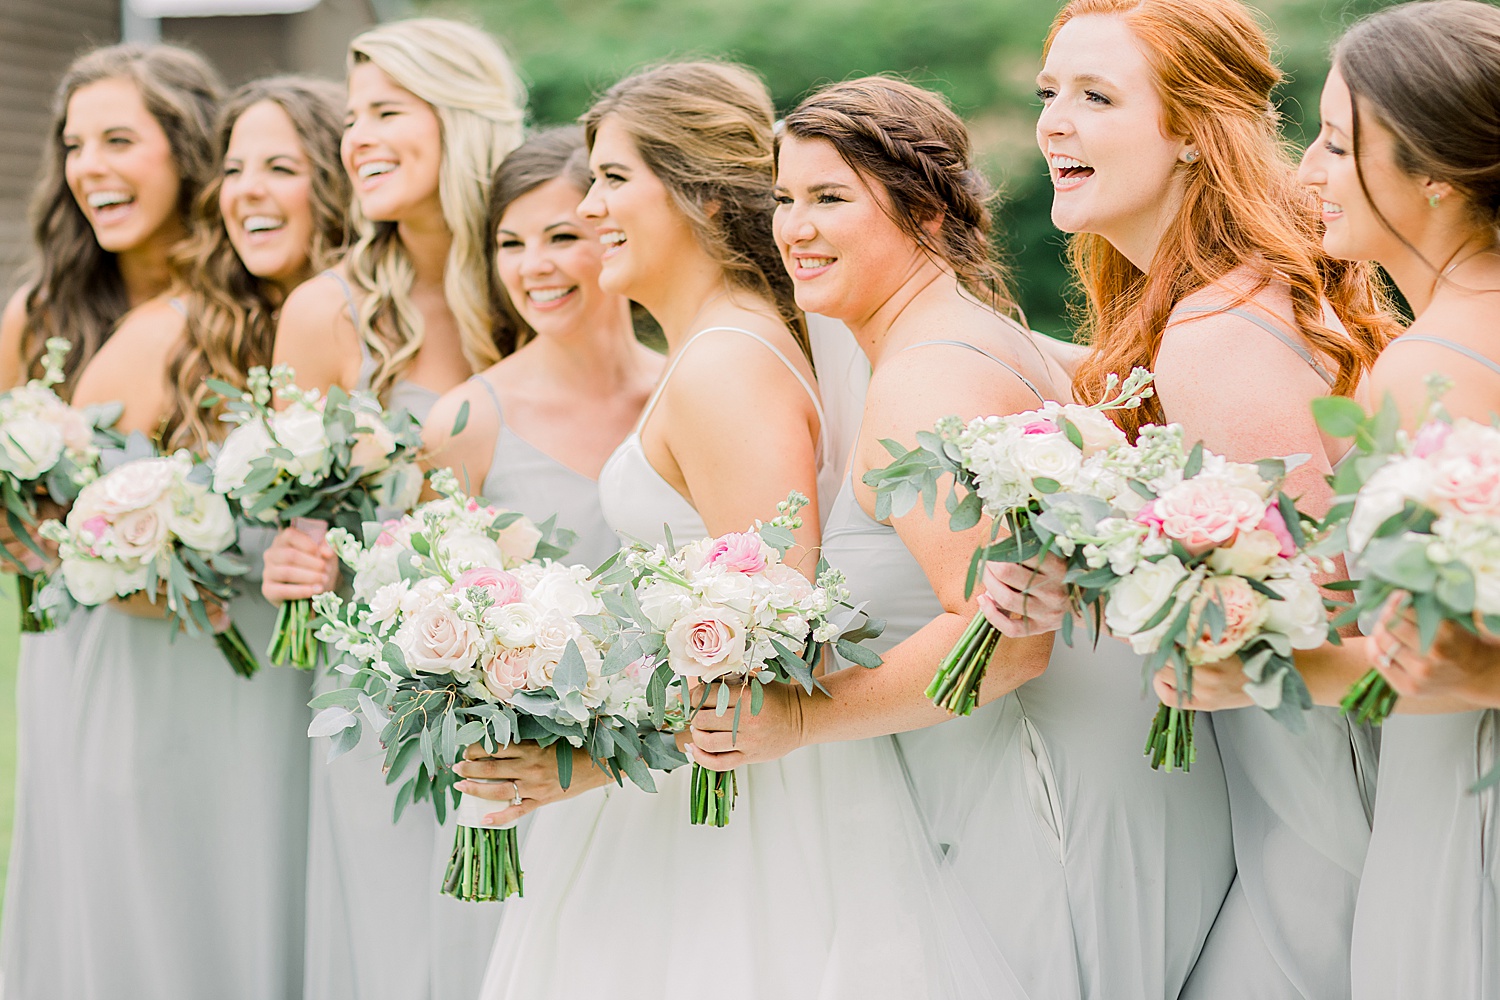 candid moment of bride with bridal party before Alabama wedding ceremony captured by Chelsea Morton Photography